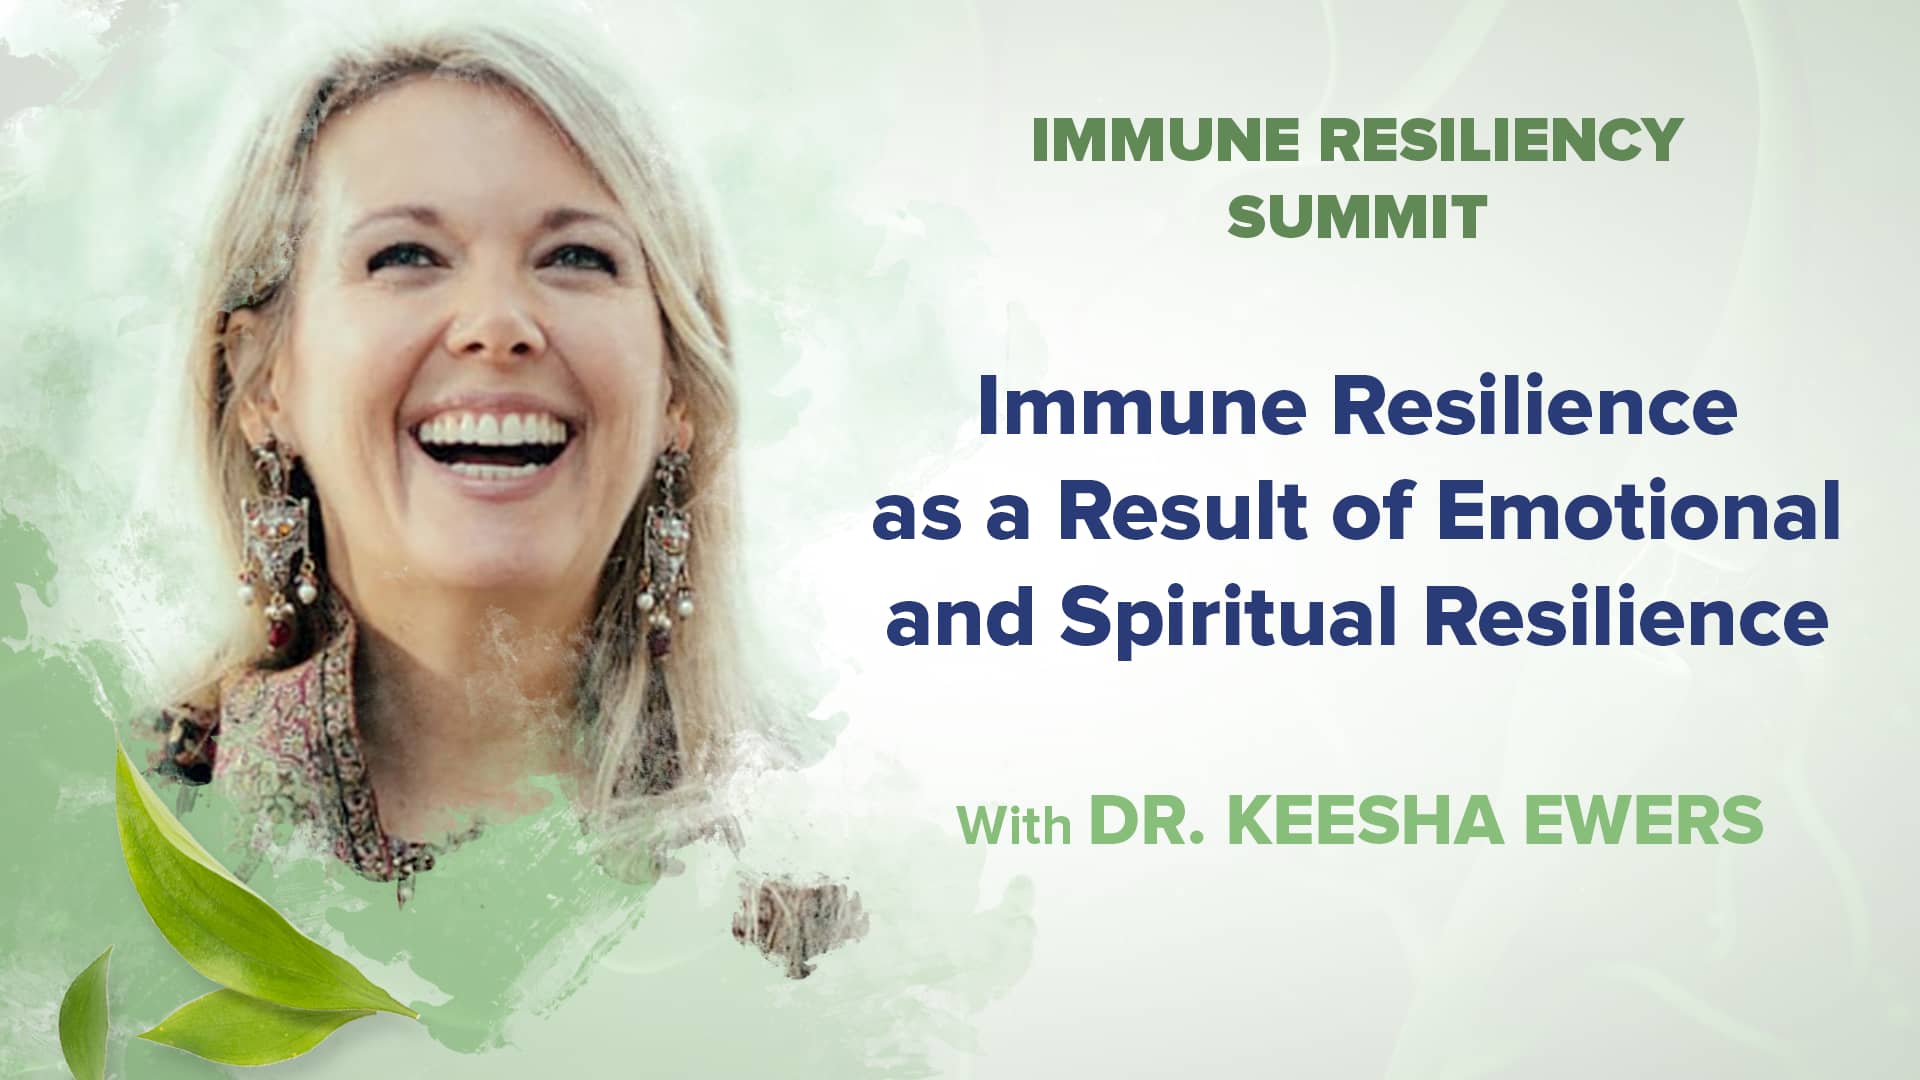 Immune Resilience as a Result of Emotional and Spiritual Resilience